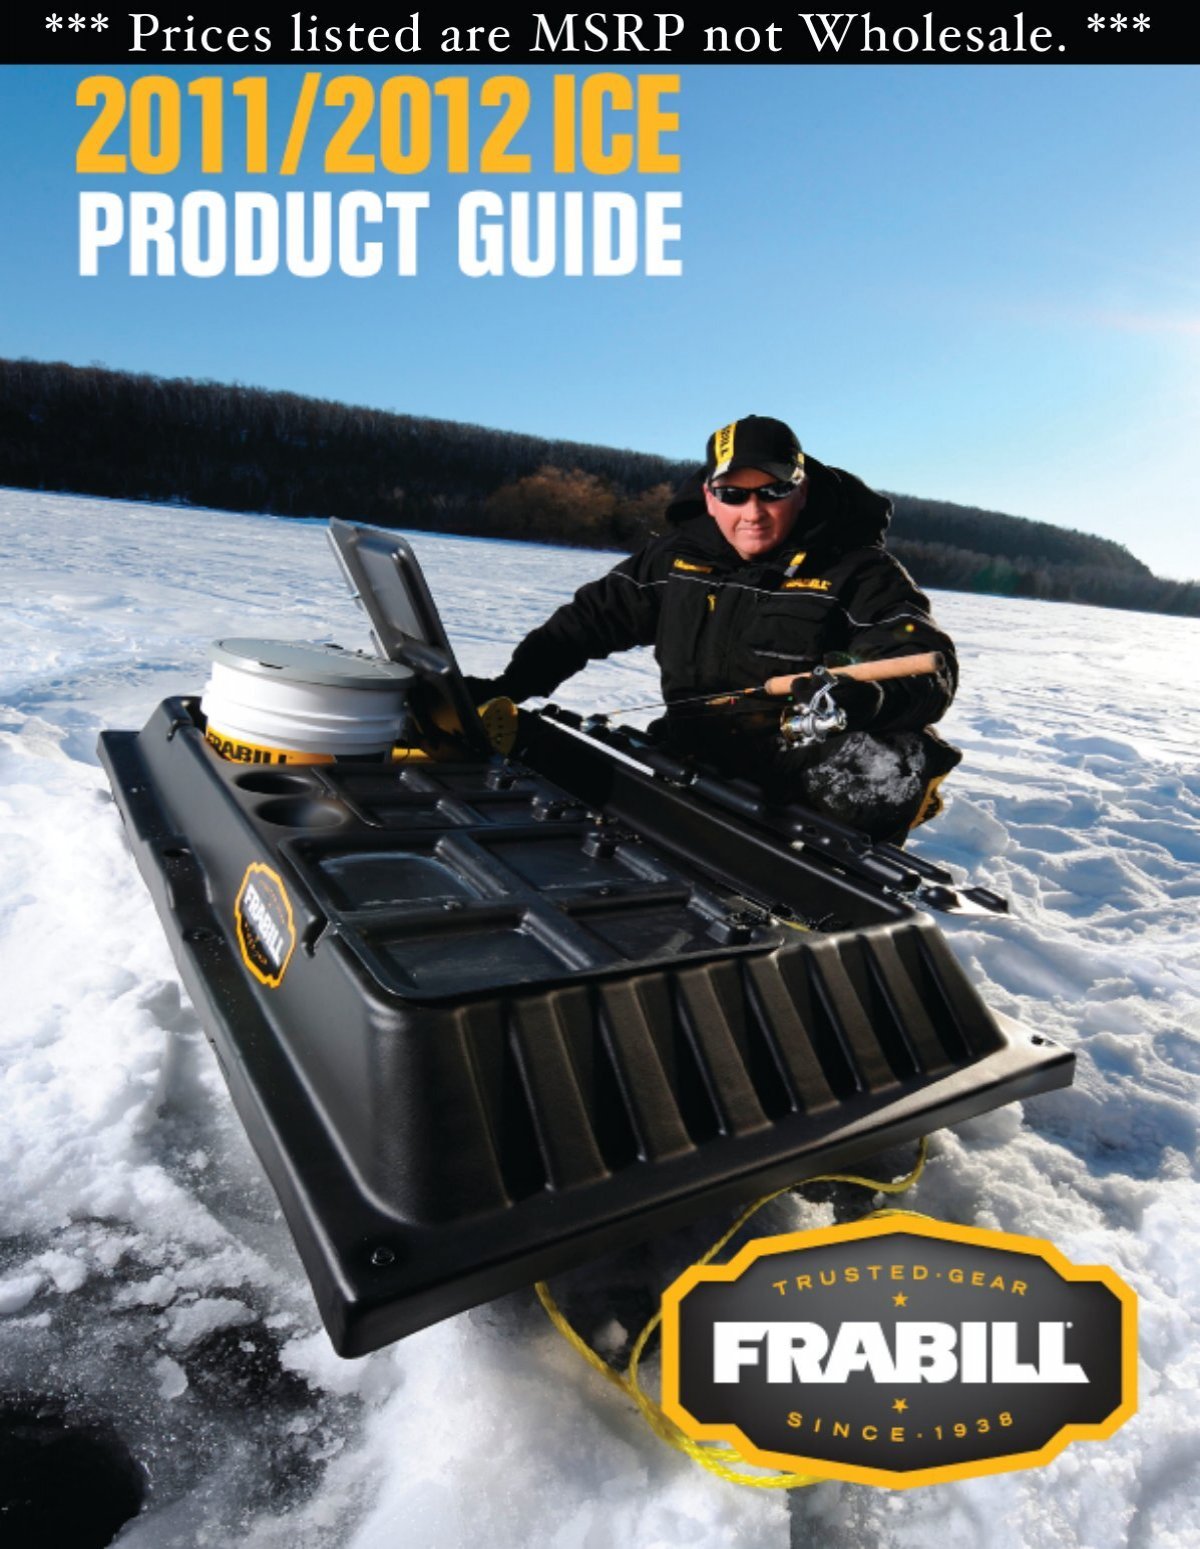 TackleDirect 2016 Winter Product Guide by TackleDirect - Issuu